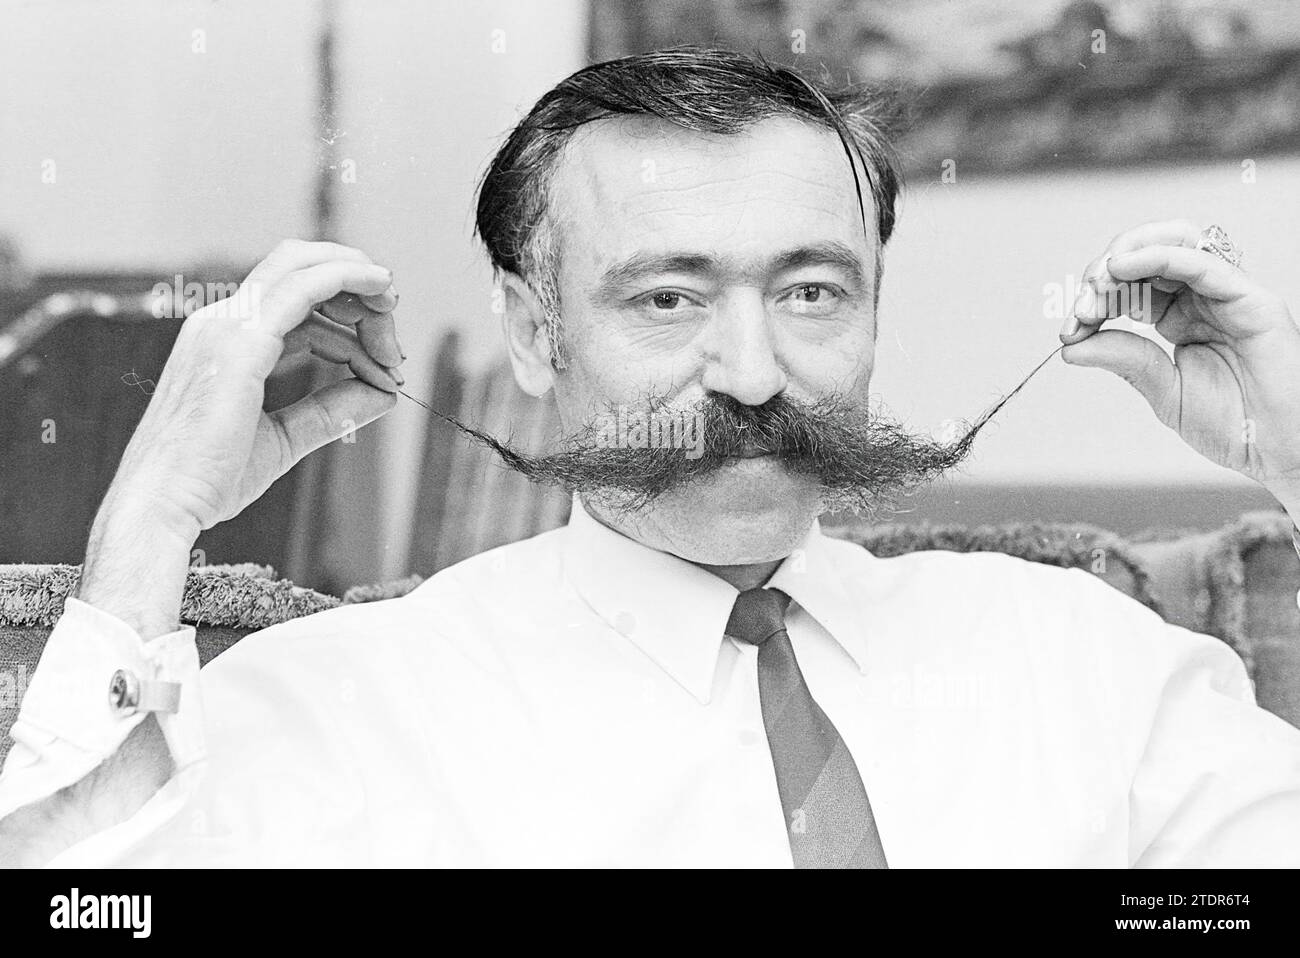 Turkish man with mustache, 02-08-1972, Whizgle News from the Past, Tailored for the Future. Explore historical narratives, Dutch The Netherlands agency image with a modern perspective, bridging the gap between yesterday's events and tomorrow's insights. A timeless journey shaping the stories that shape our future Stock Photo